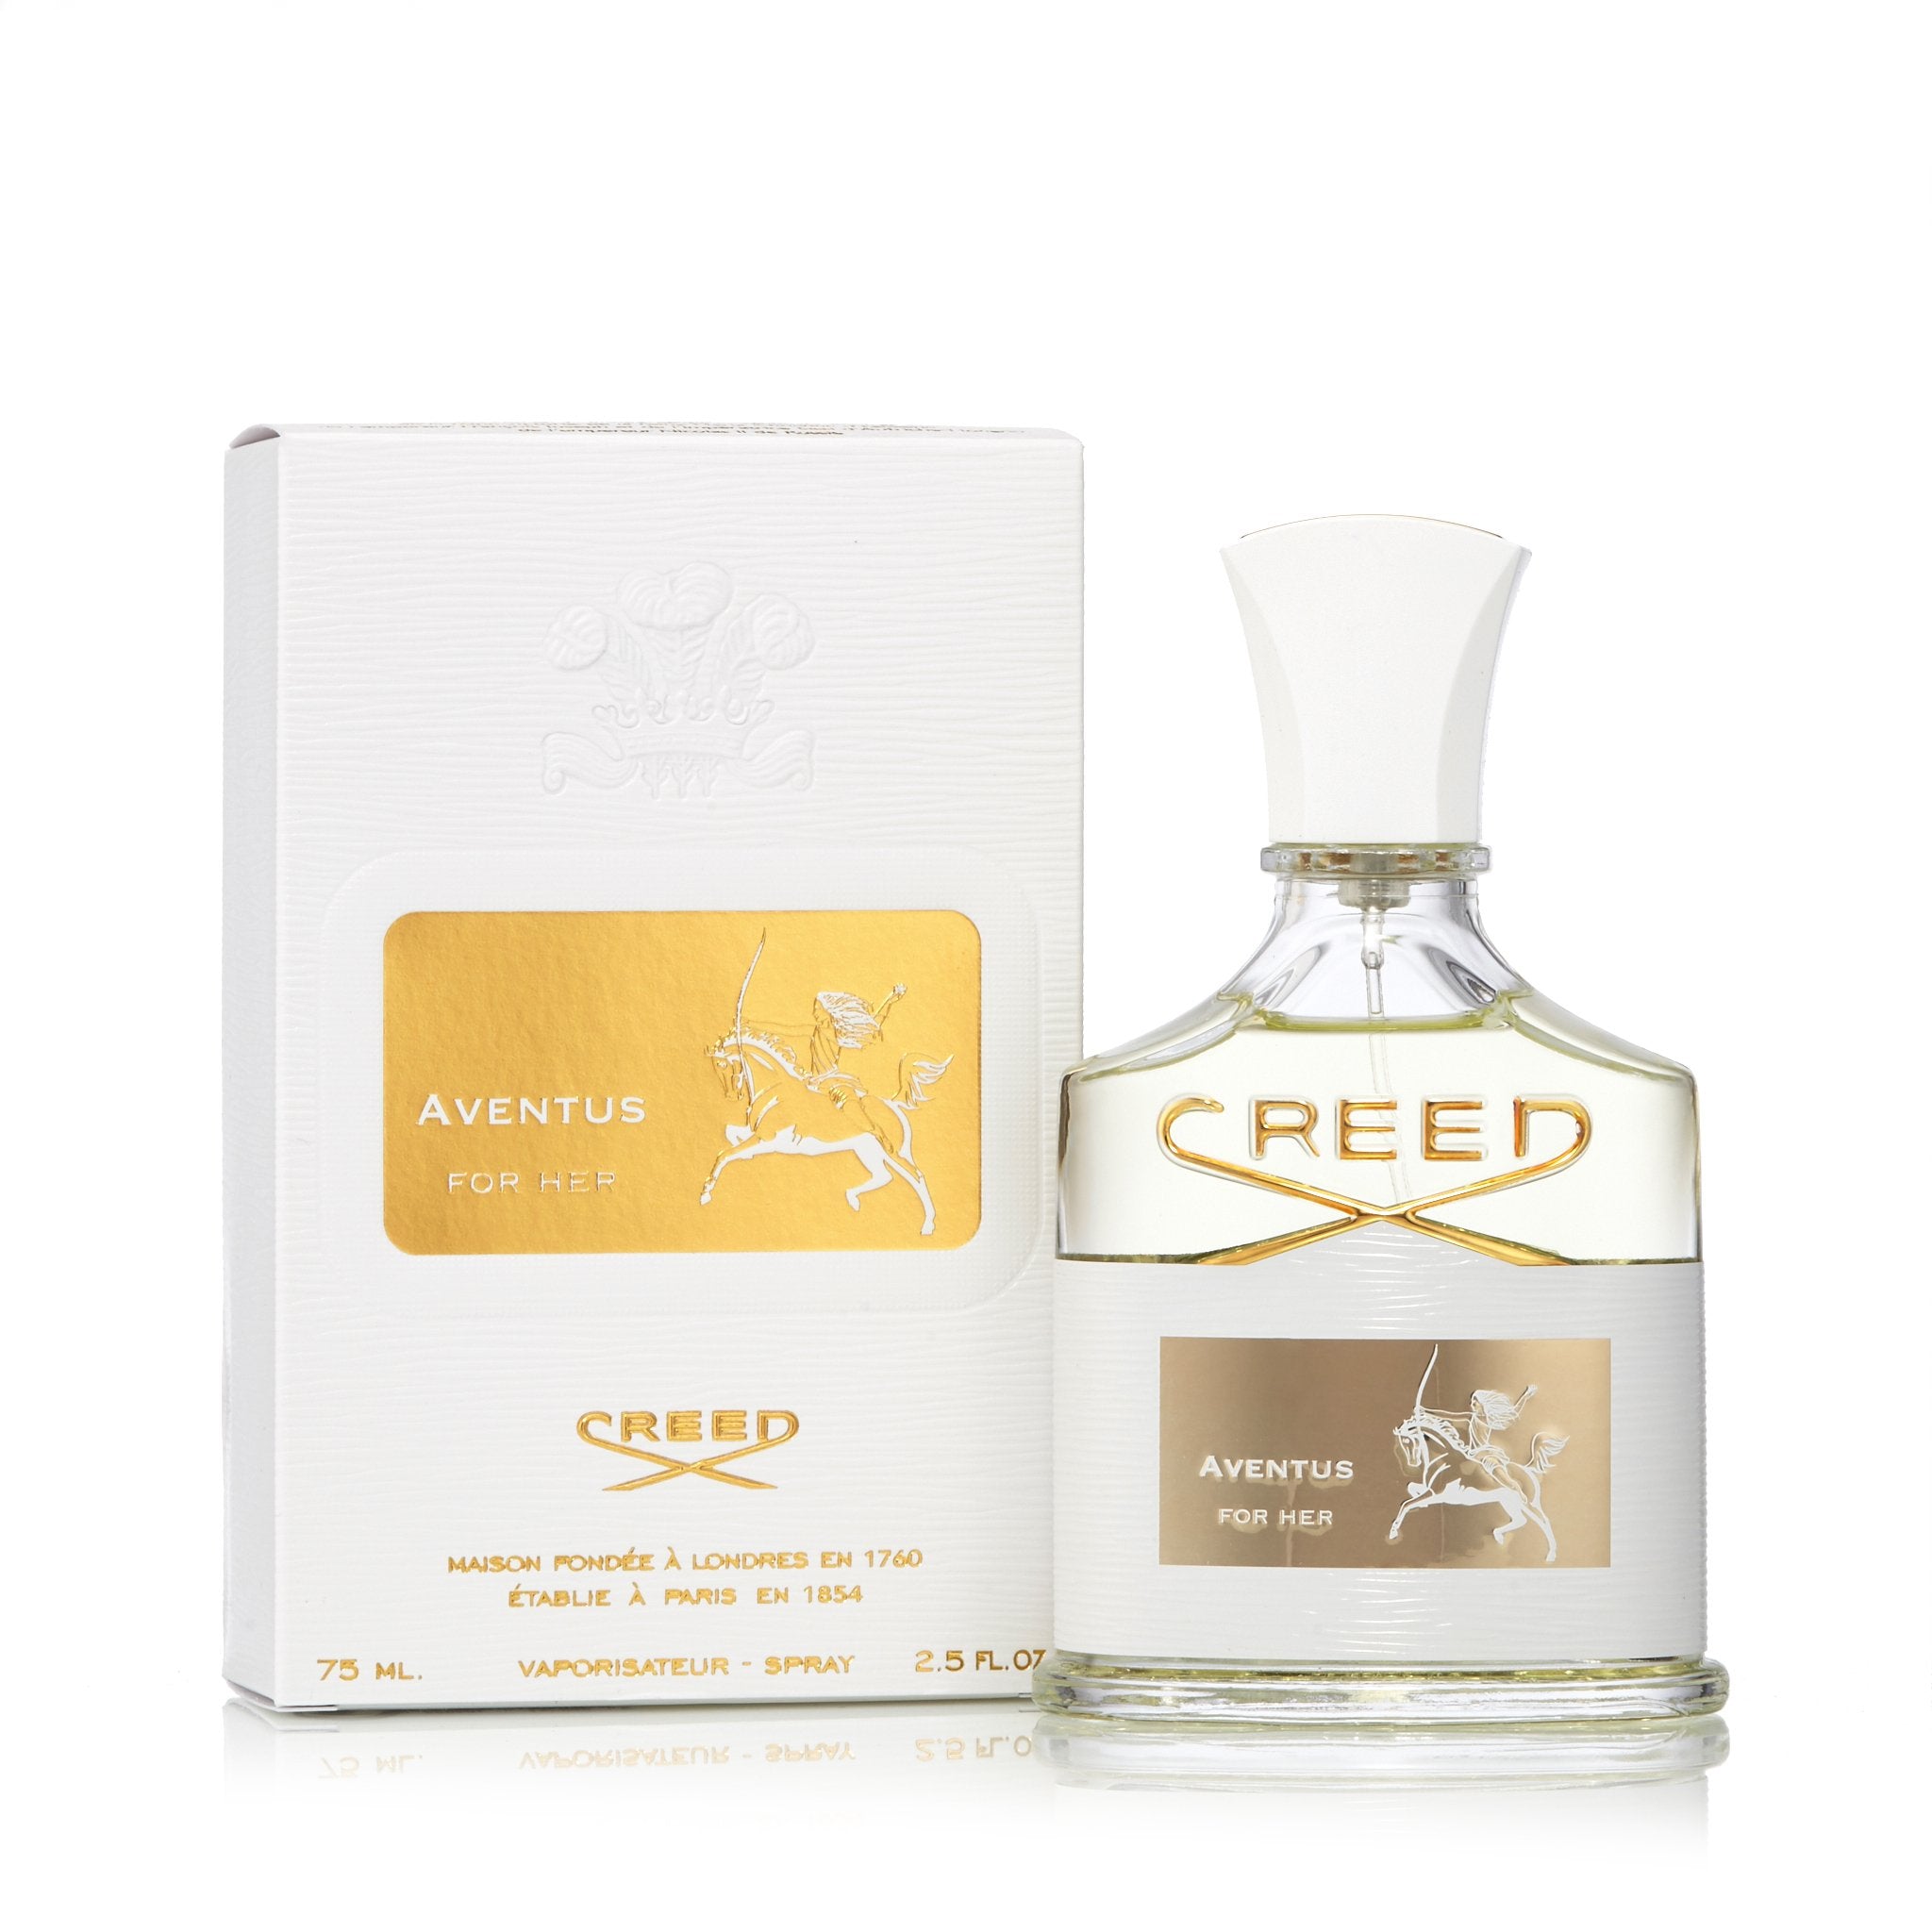 Aventus for Her – Creed Fragrance by Women Eau for Outlet de Spray Parfum